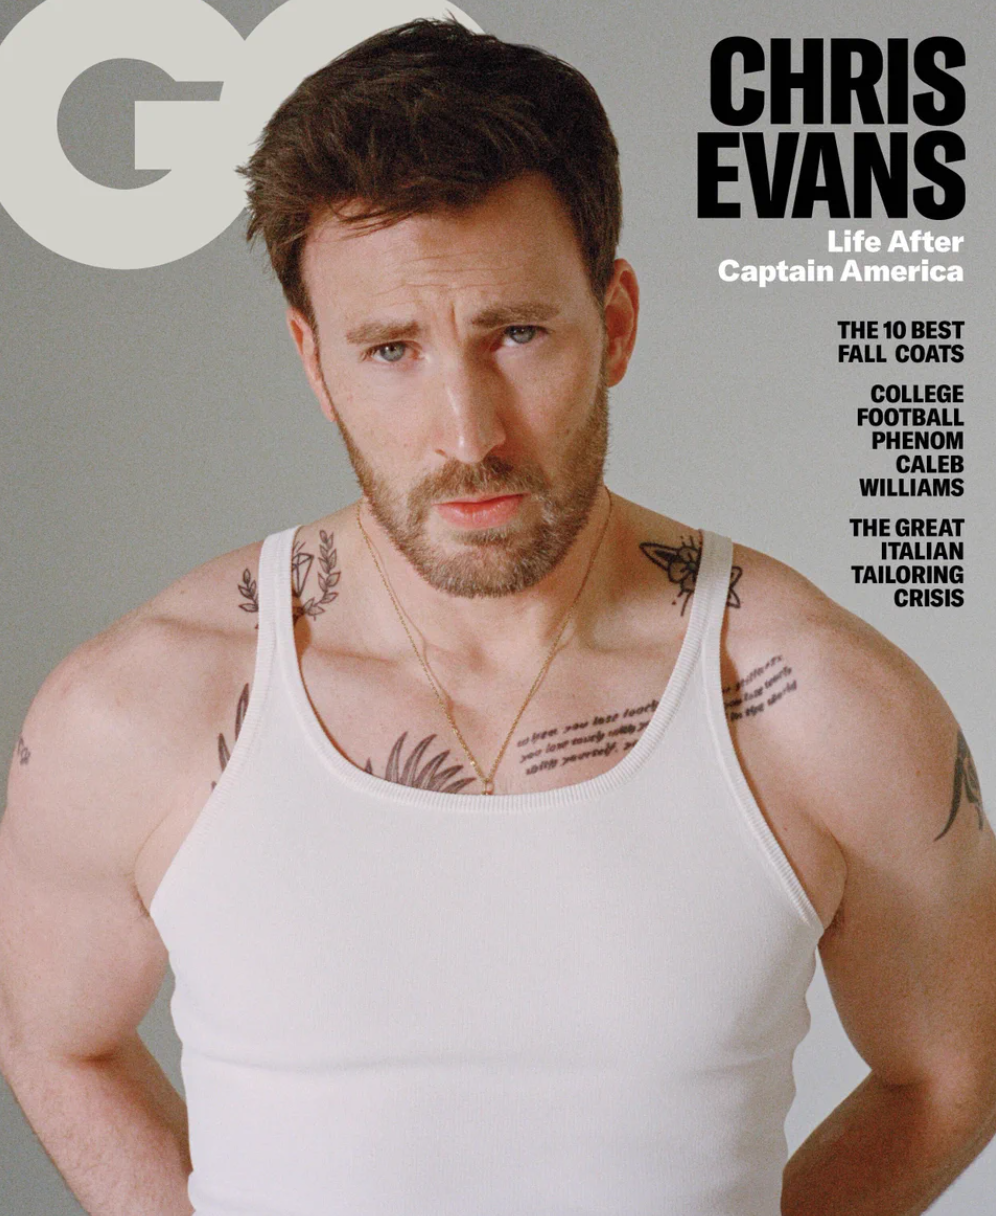 Chris Evans gets candid about in his expression of the angst he feels